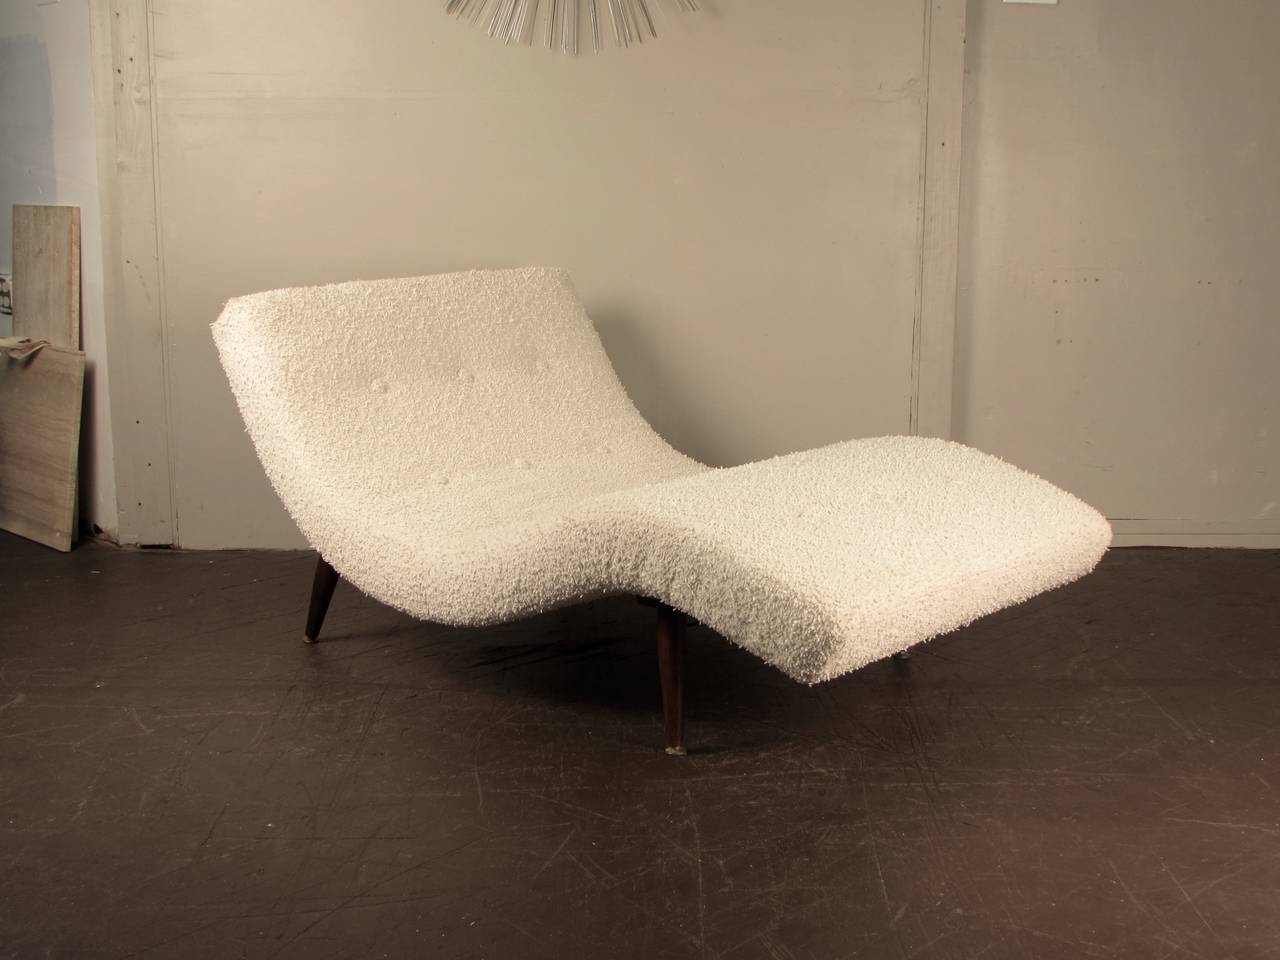 Mid-20th Century Undulating Wave Chaise Lounge by Adrian Pearsall for Craft Associates, 1960s